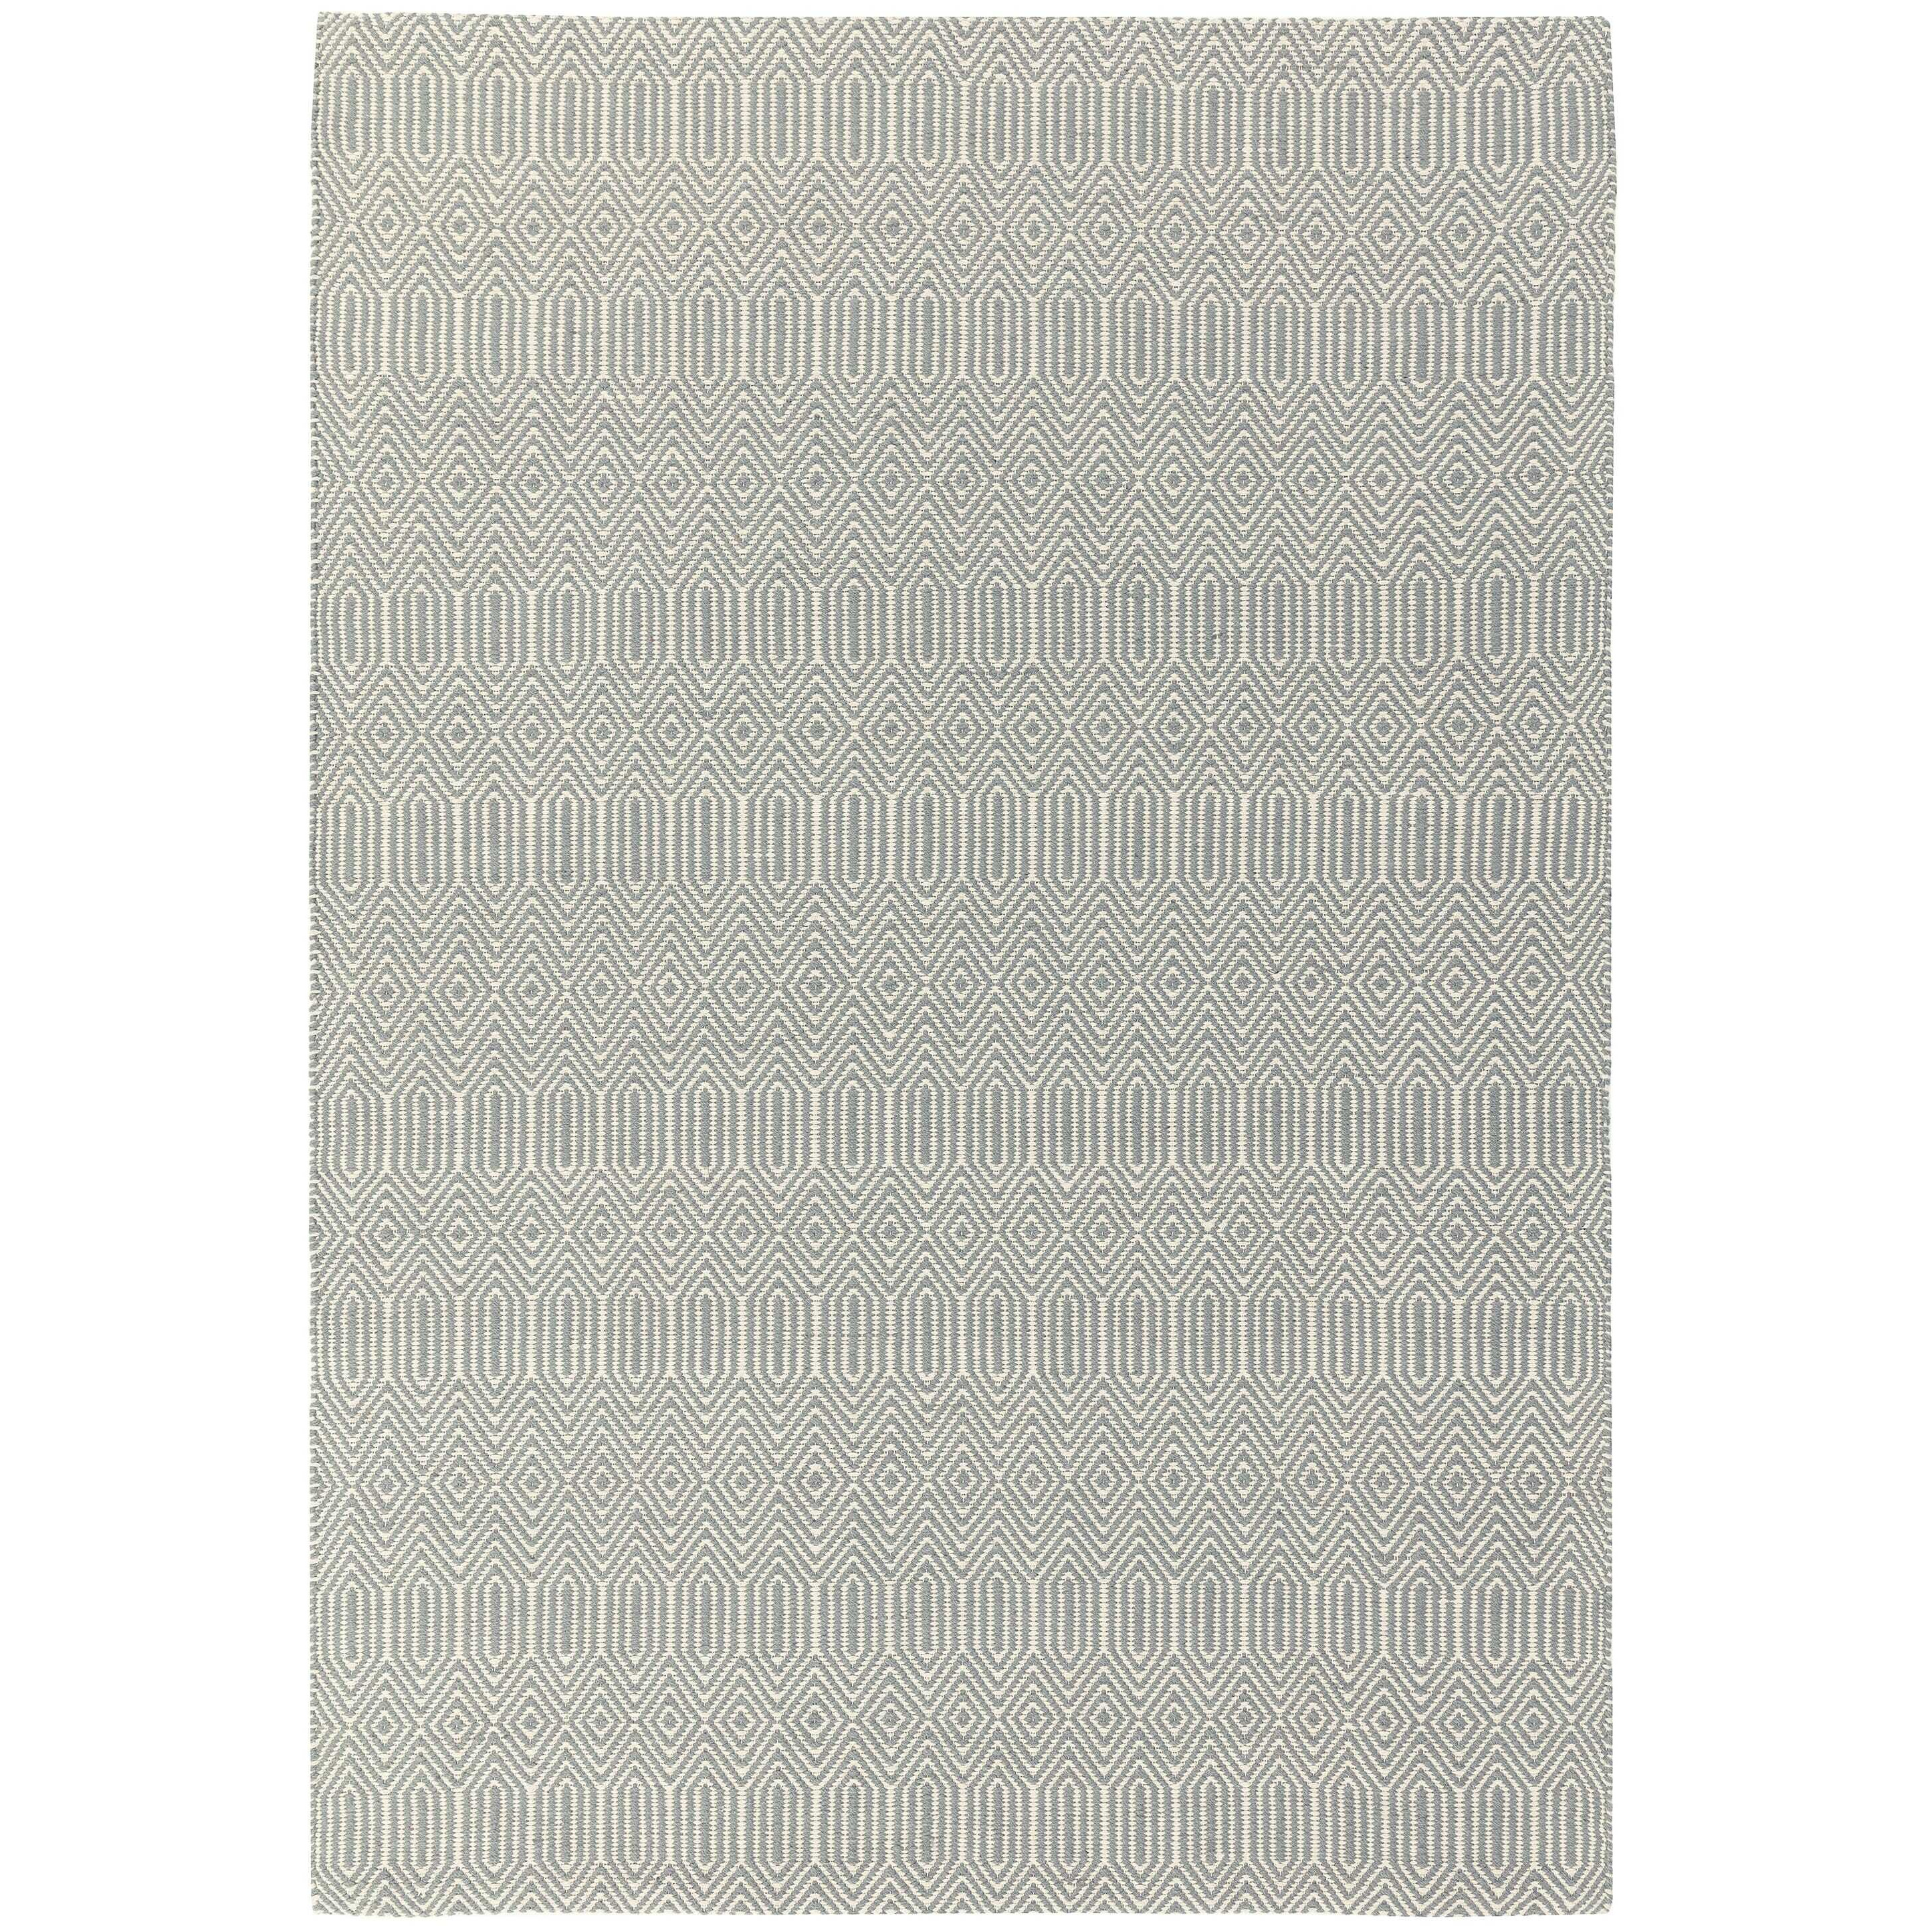 Asiatic Carpets Sloan Hand Woven Rug Silver - 100 x 150cm - image 1